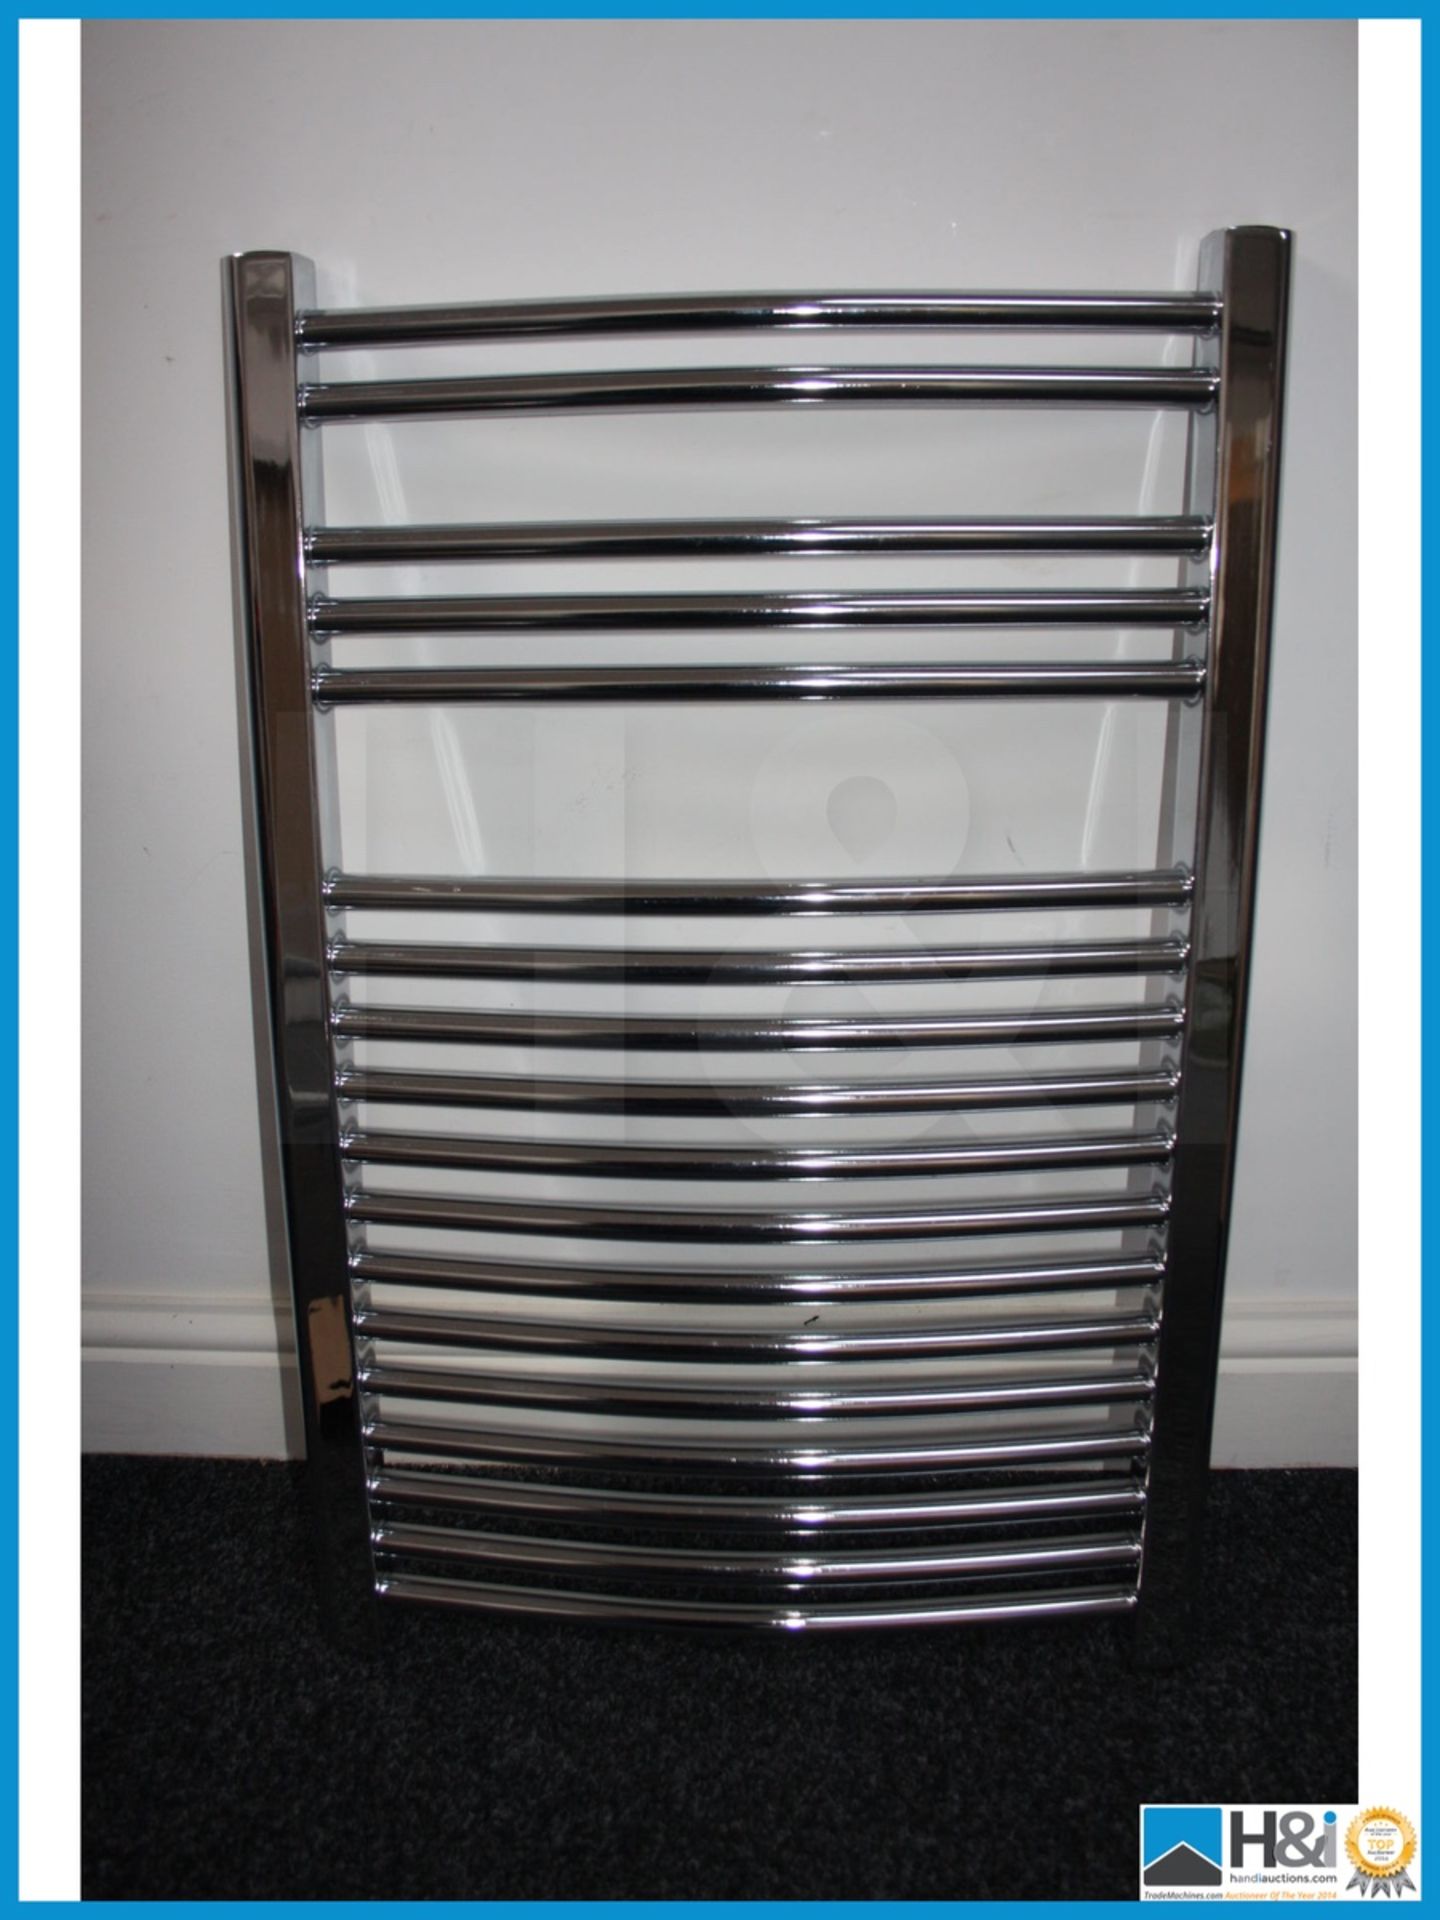 Chrome curved heated towel rail with fitting kit unused and boxed 760 x 500 mm. Appraisal: Viewing - Image 2 of 3